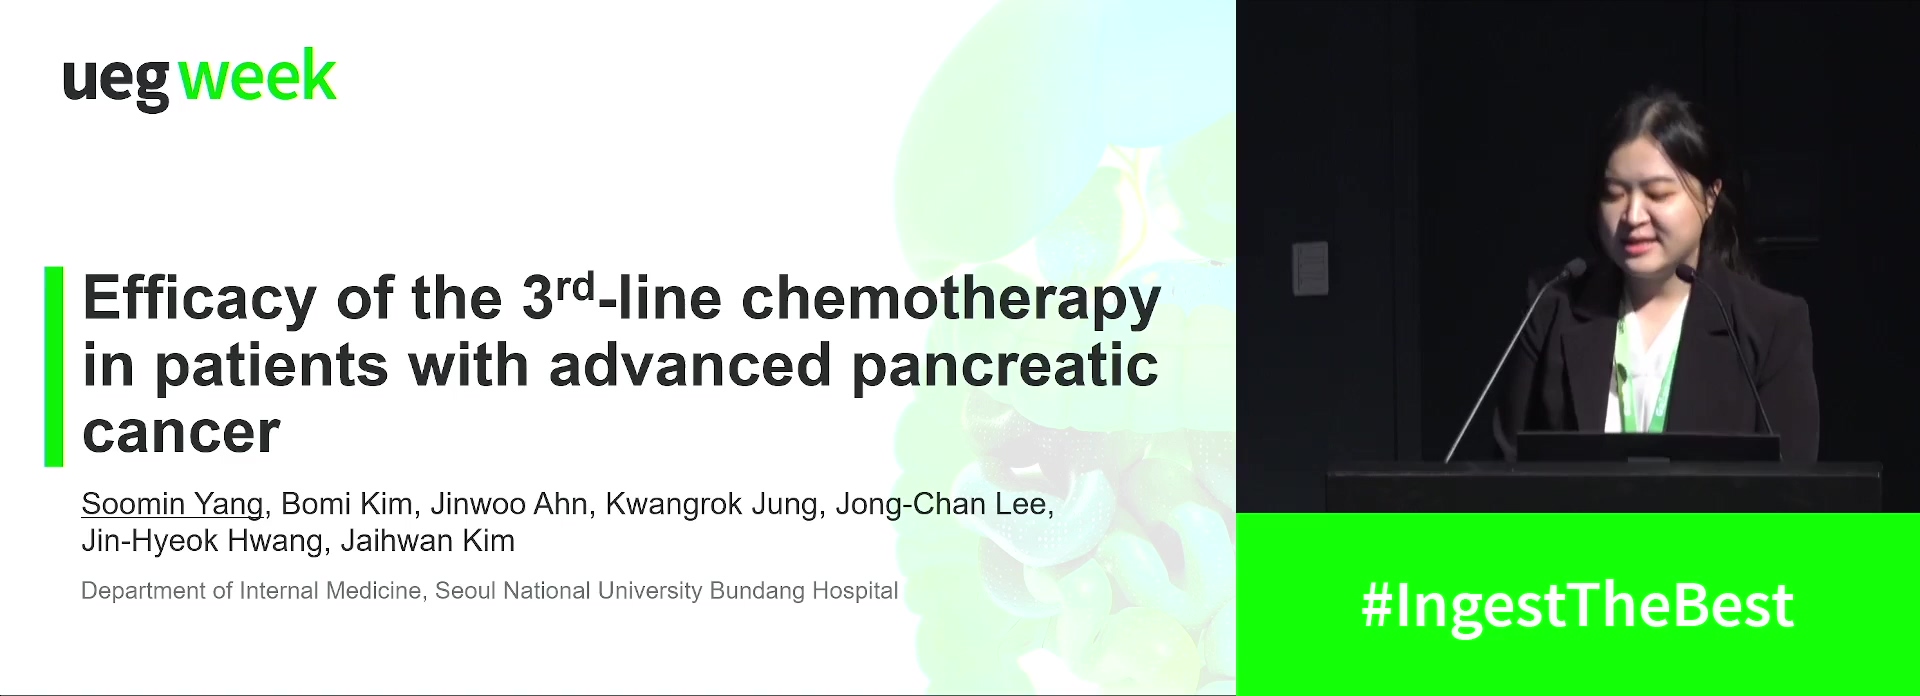 EFFICACY OF THE THIRD-LINE CHEMOTHERAPY IN PATIENTS WITH ADVANCED PANCREATIC CANCER